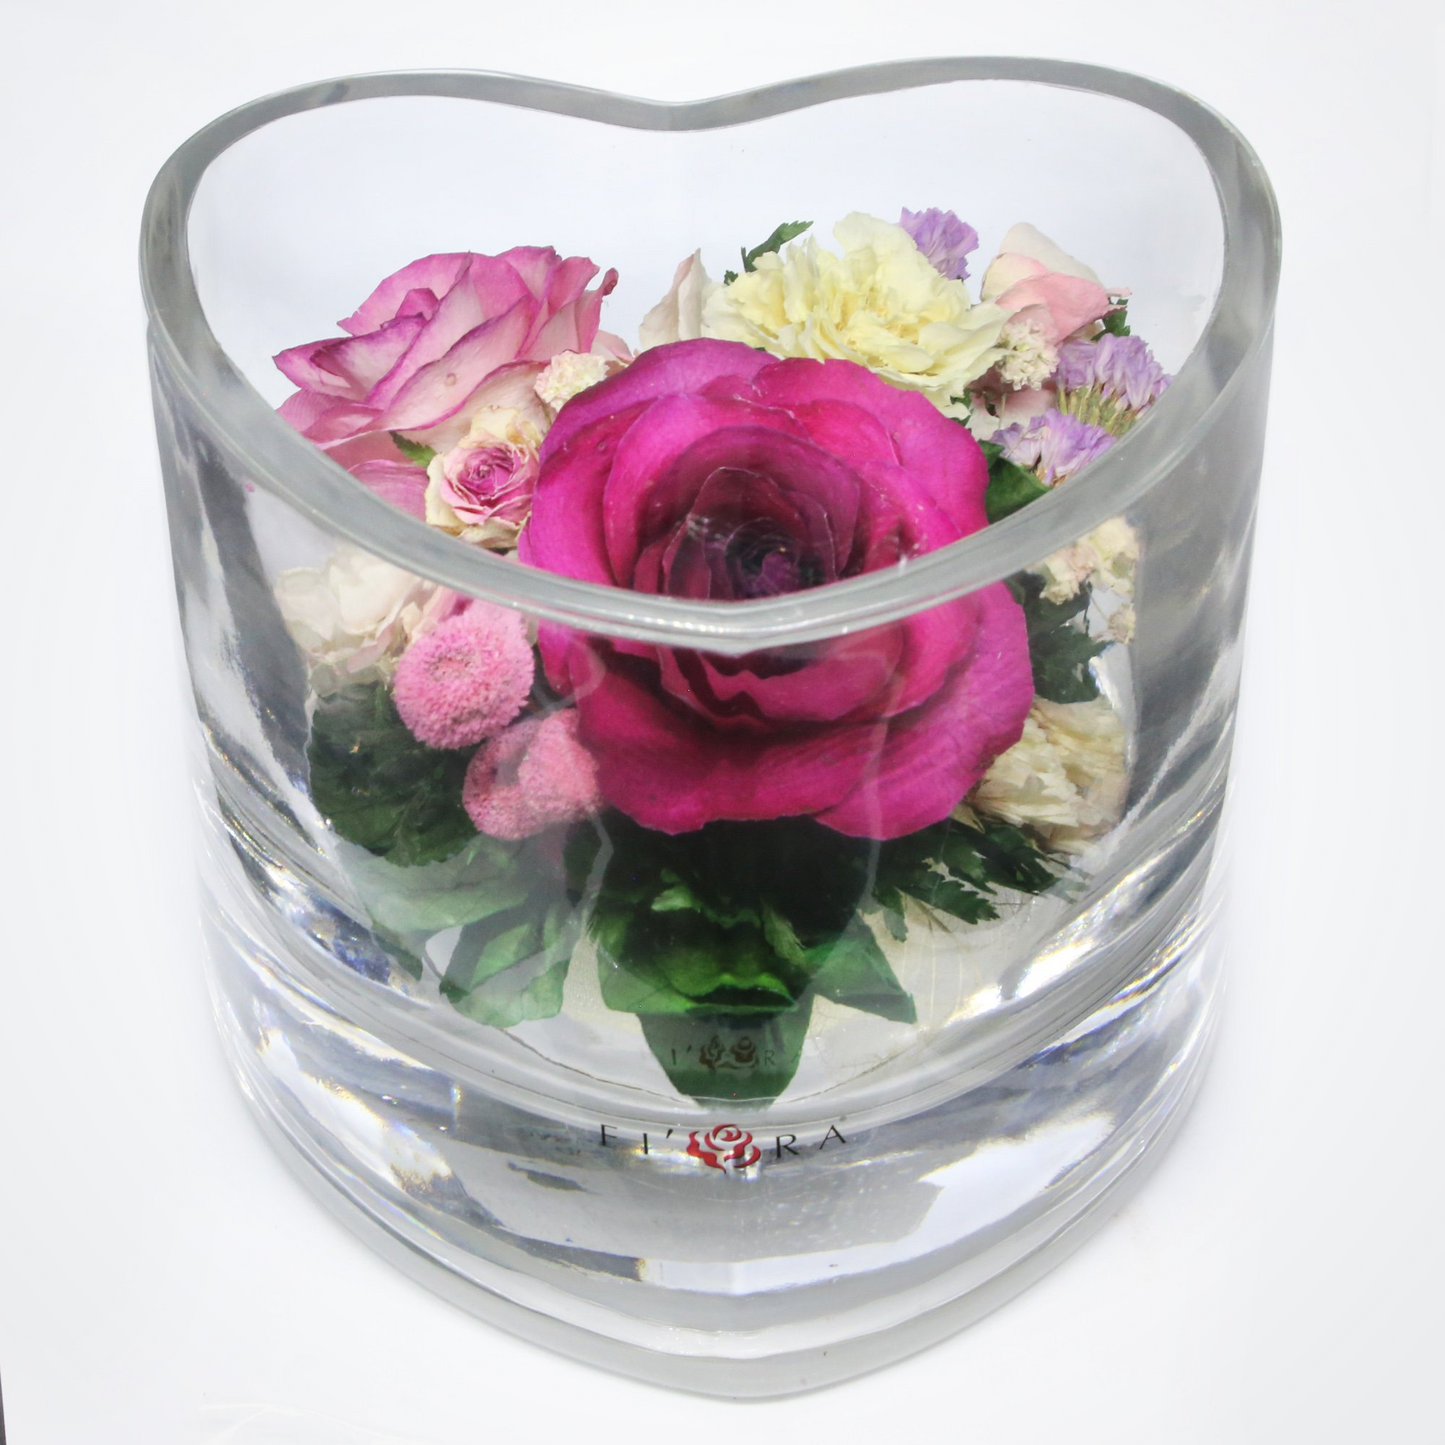 60168 Long-Lasting Roses in a Heart-Shaped Vase